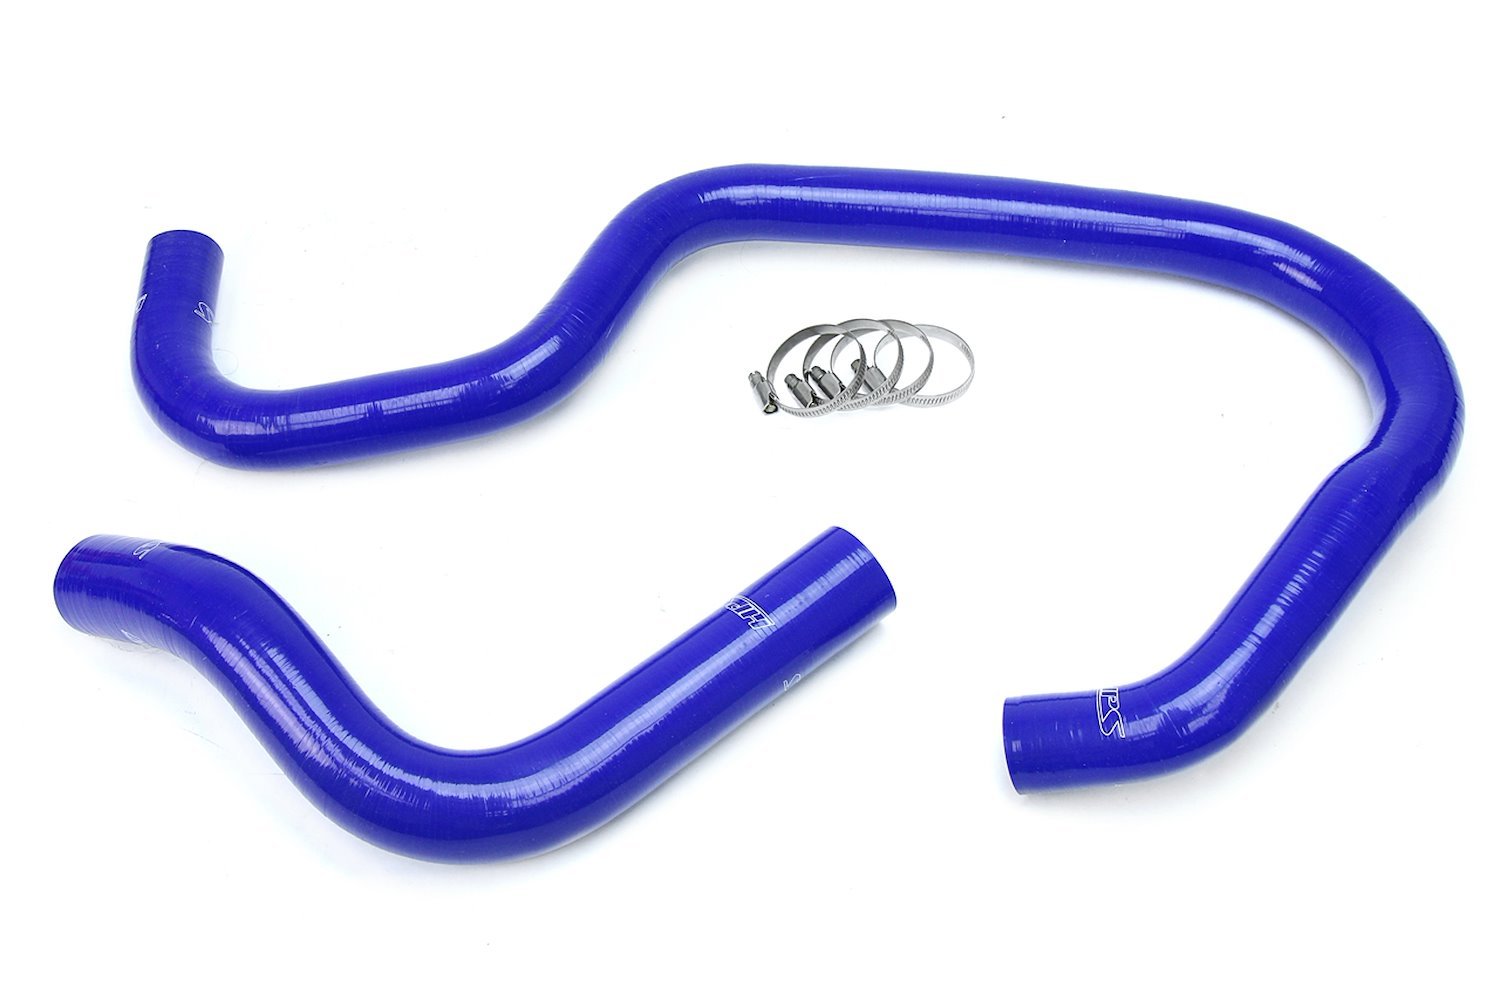 57-1686R-BLUE Radiator Hose Kit, High-Temp 3-Ply Reinforced Silicone, Replace OEM Rubber Radiator Coolant Hoses